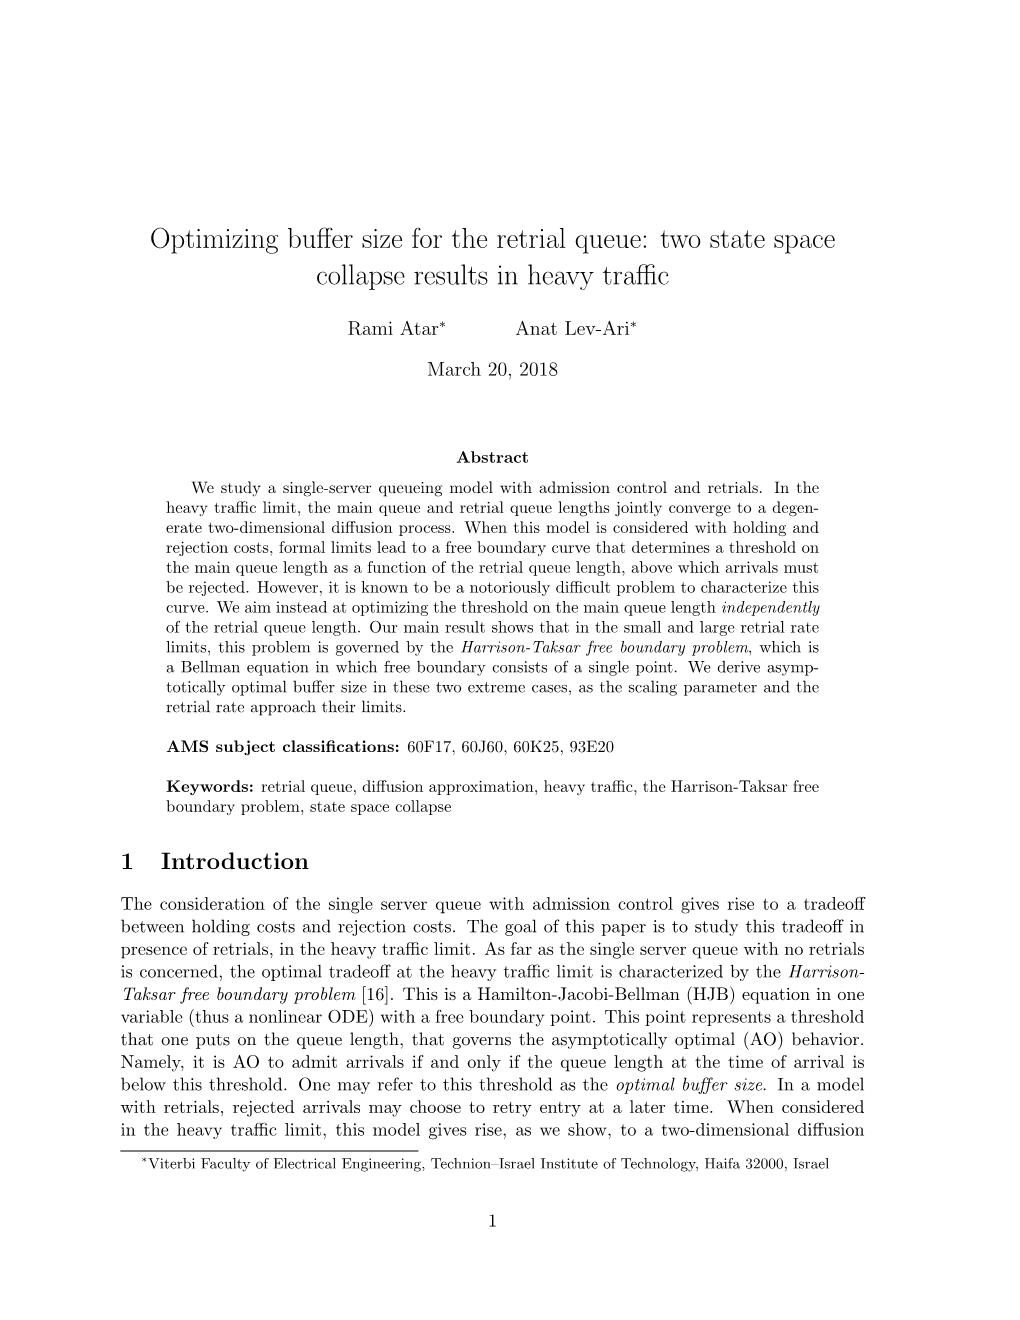 Optimizing Buffer Size for the Retrial Queue: Two State Space Collapse